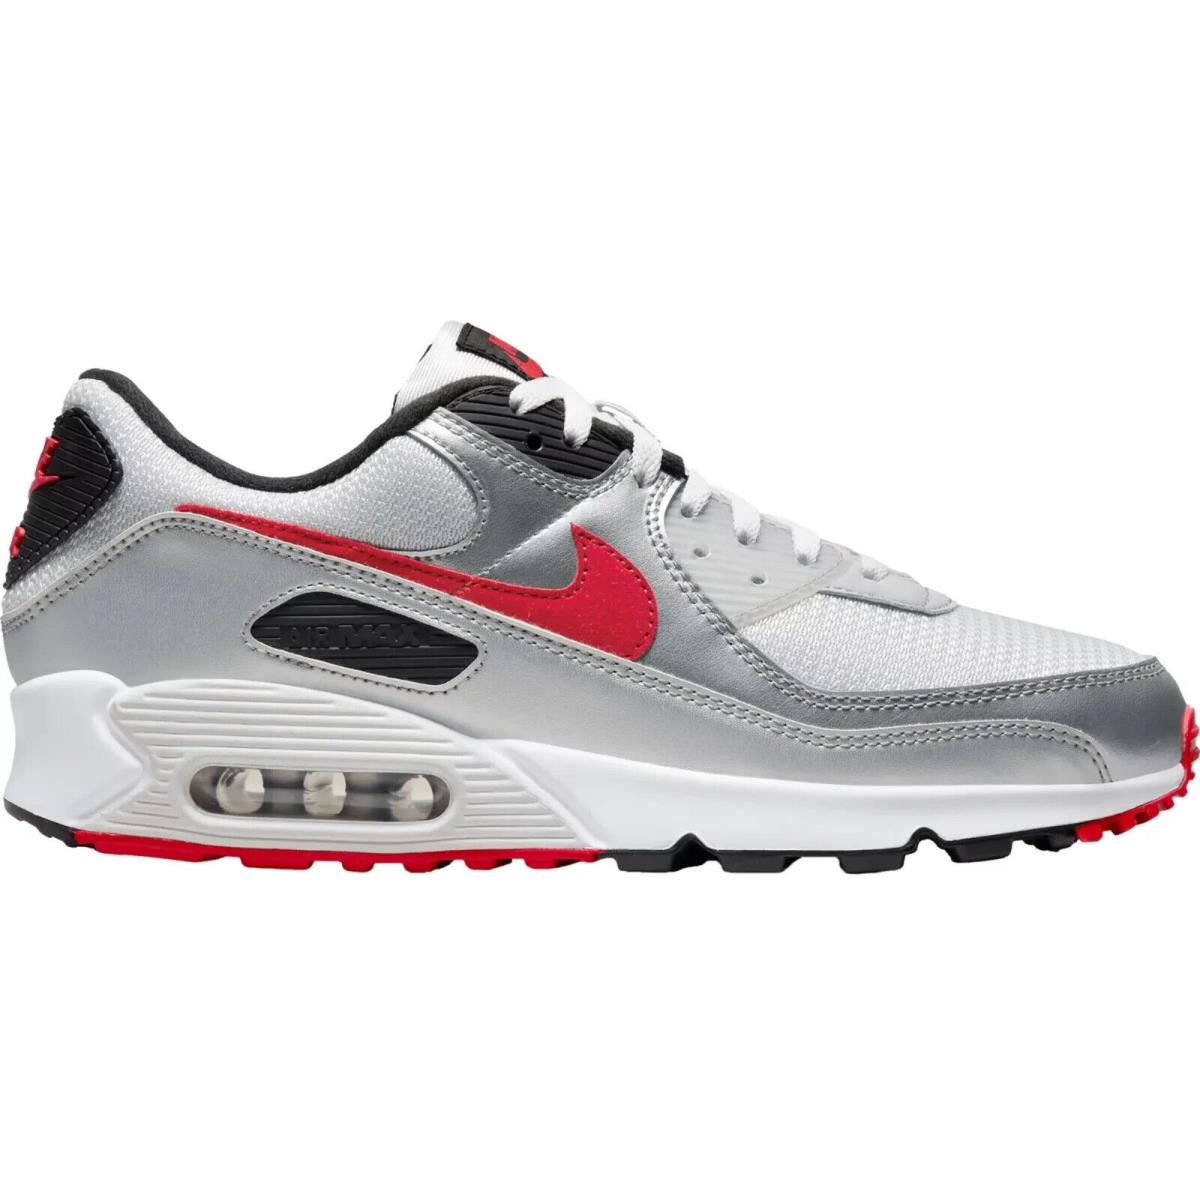 Nike Air Max 90 Men`s Casual Shoes All Colors US Sizes 7-14 Bestseller Photon Dust/Metallic Silver/Black/University Red